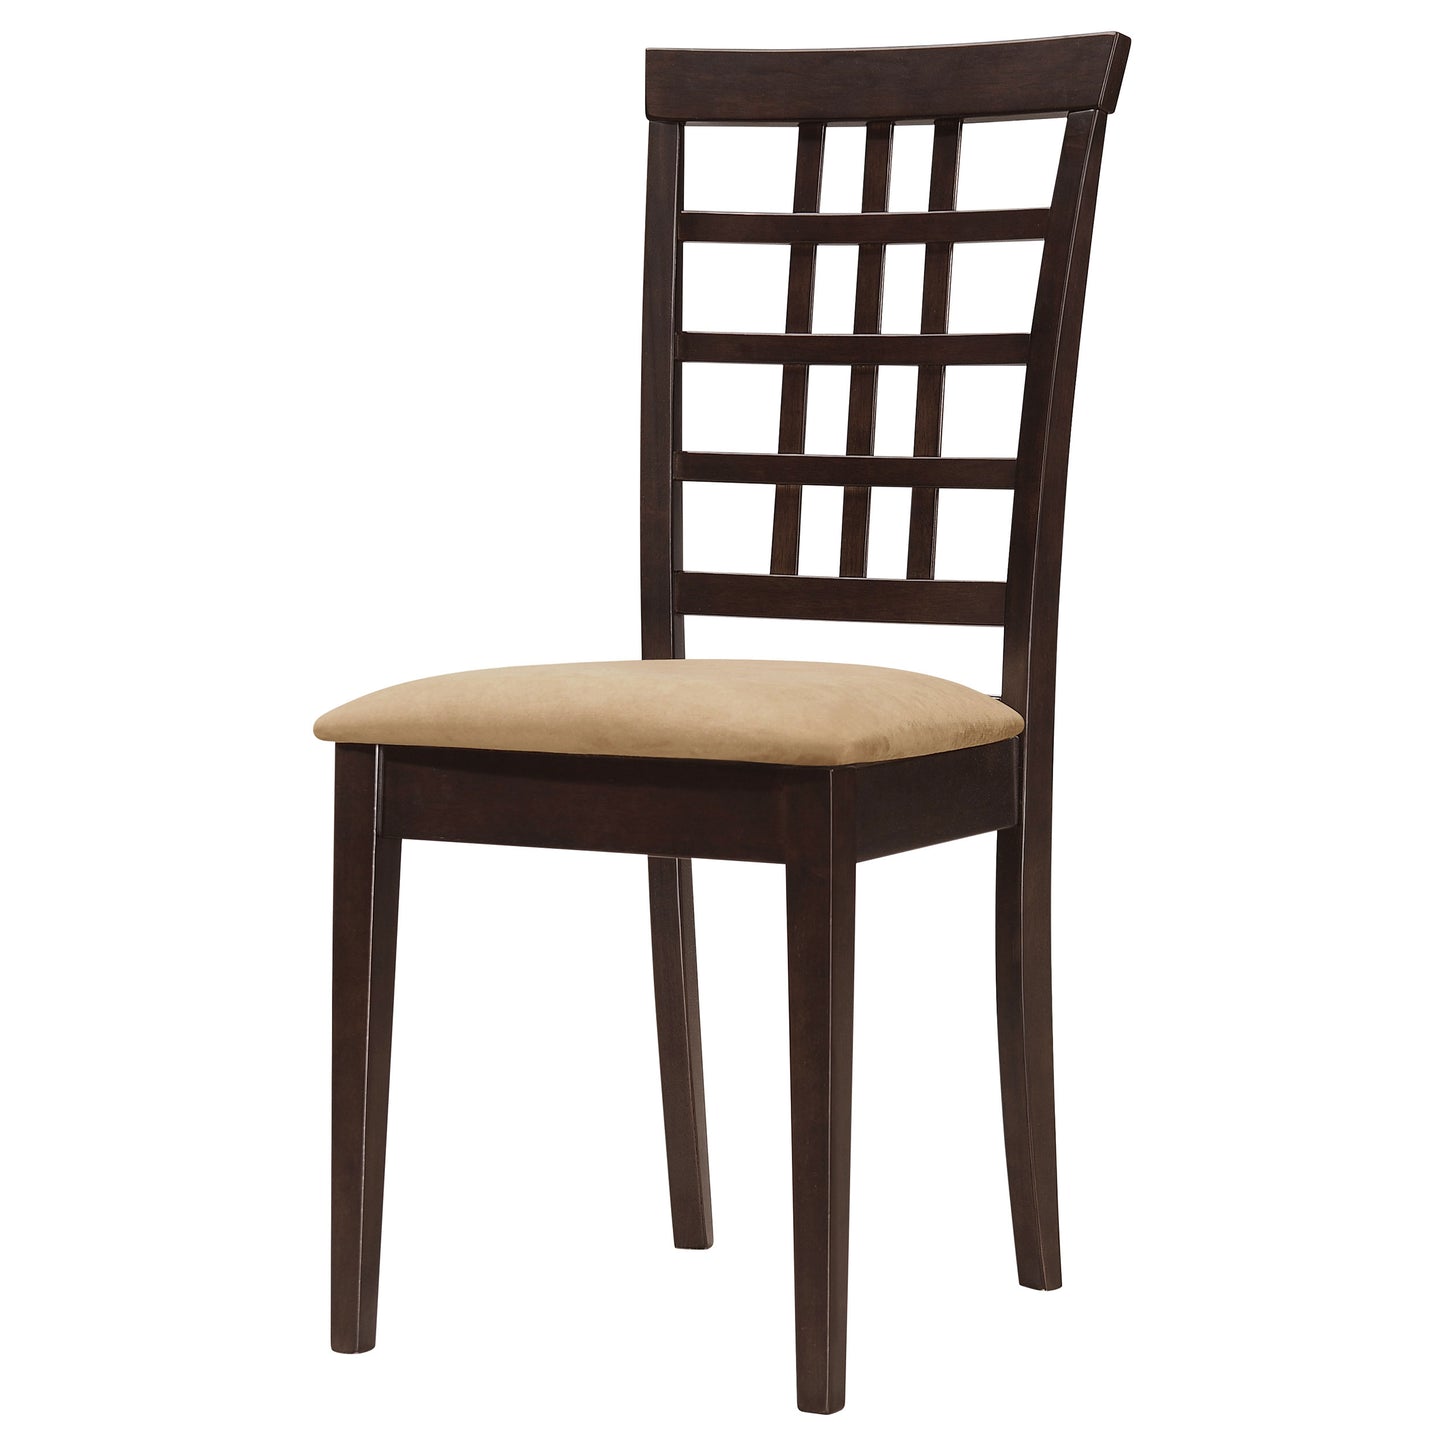 Kelso Lattice Back Dining Chairs Cappuccino (Set of 2)